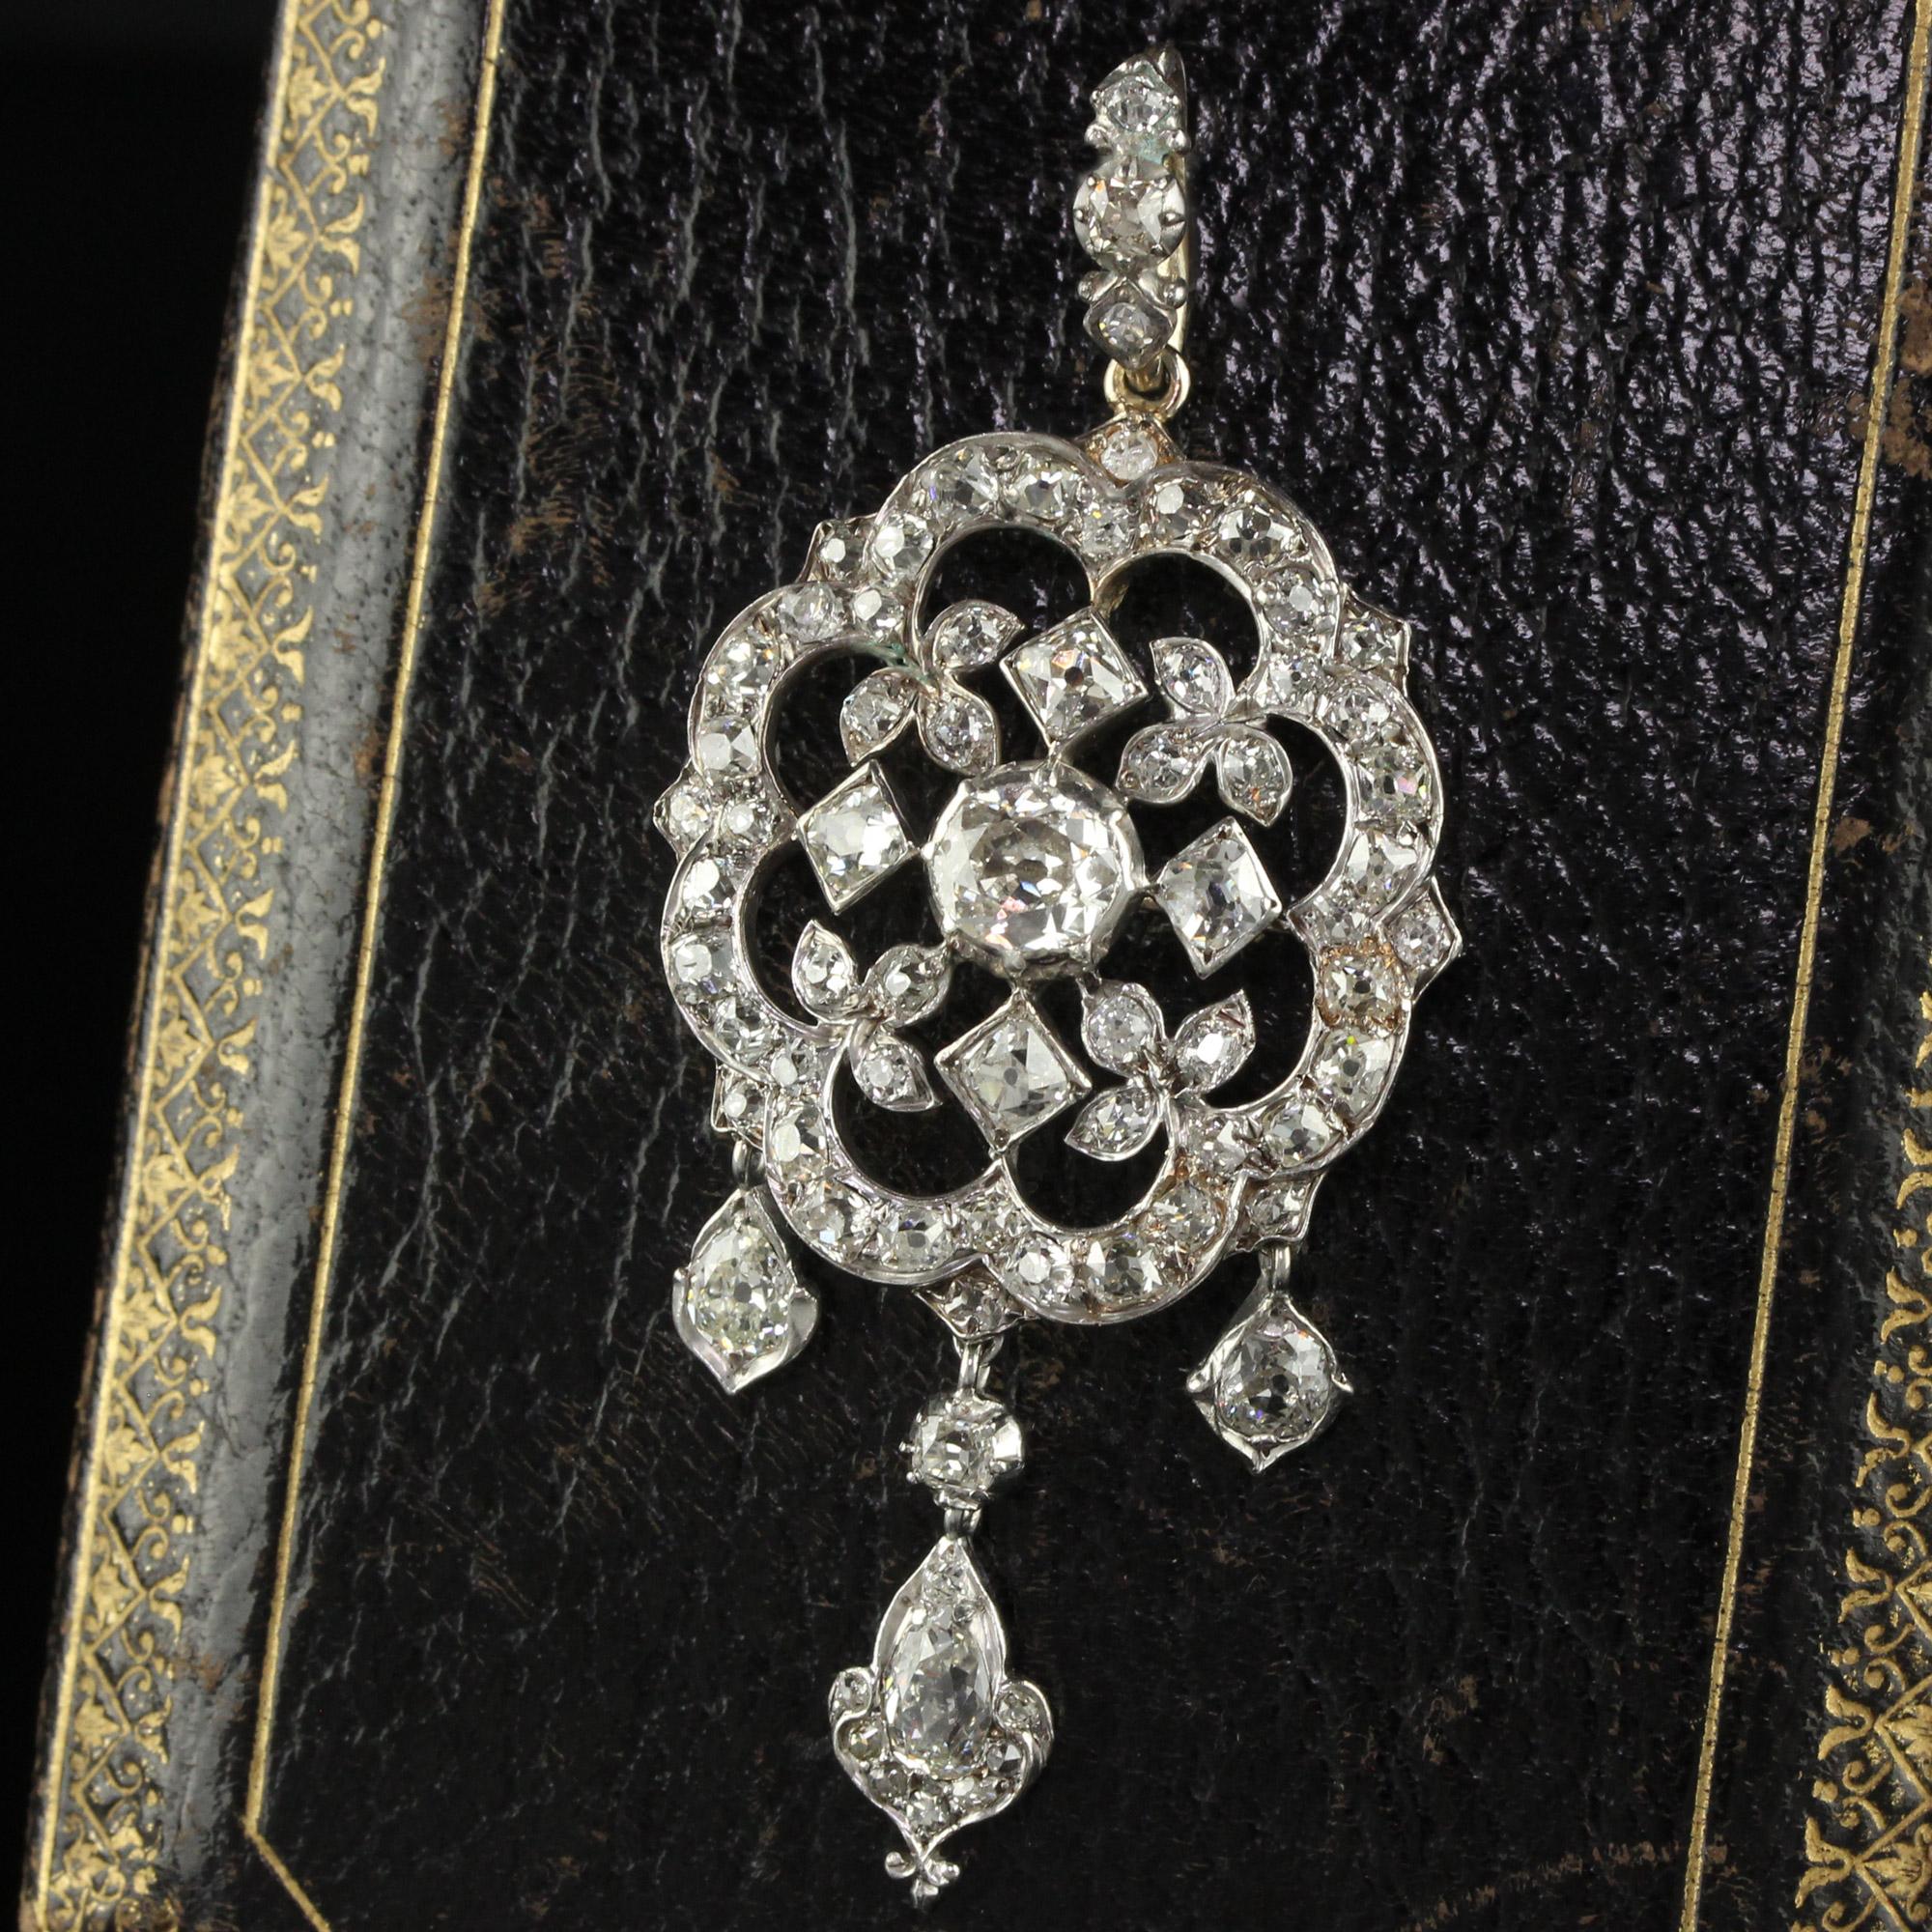 Beautiful Antique Victorian Silver and Gold Old Mine Cut Diamond Pear Shape Diamond Pendant and Pin. The pendant has old mine cut diamonds and very unique old pear shape diamonds hanging from the bottom. They are white and have beautiful sparkle on